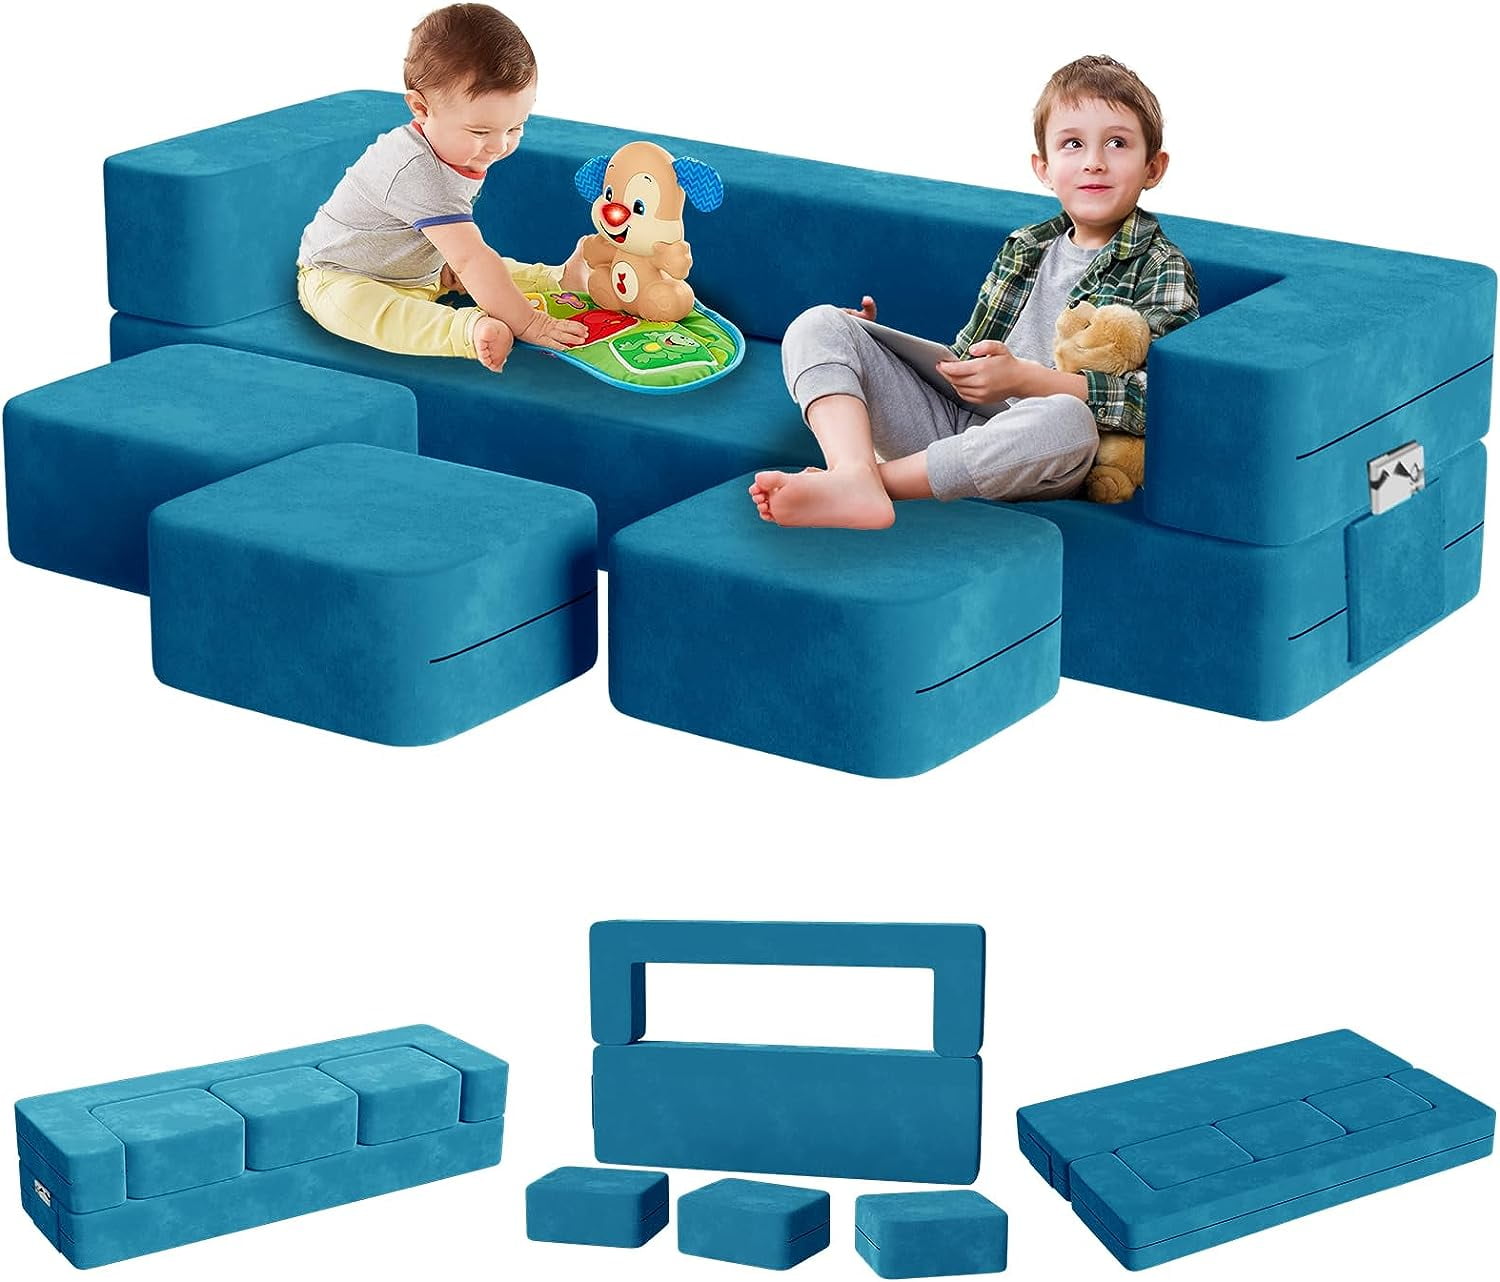 Kids Couch Linor Extra Large Toddler Couch 3 Ottomans 5 1 Modular Playroom Bedroom Fold Out Sofa Floor Baby Play Kids Blue E8752a9b 0a0e 4b14 8b17 78c7aad6a6be.dfd372023a420925a30cdfa617c30699 